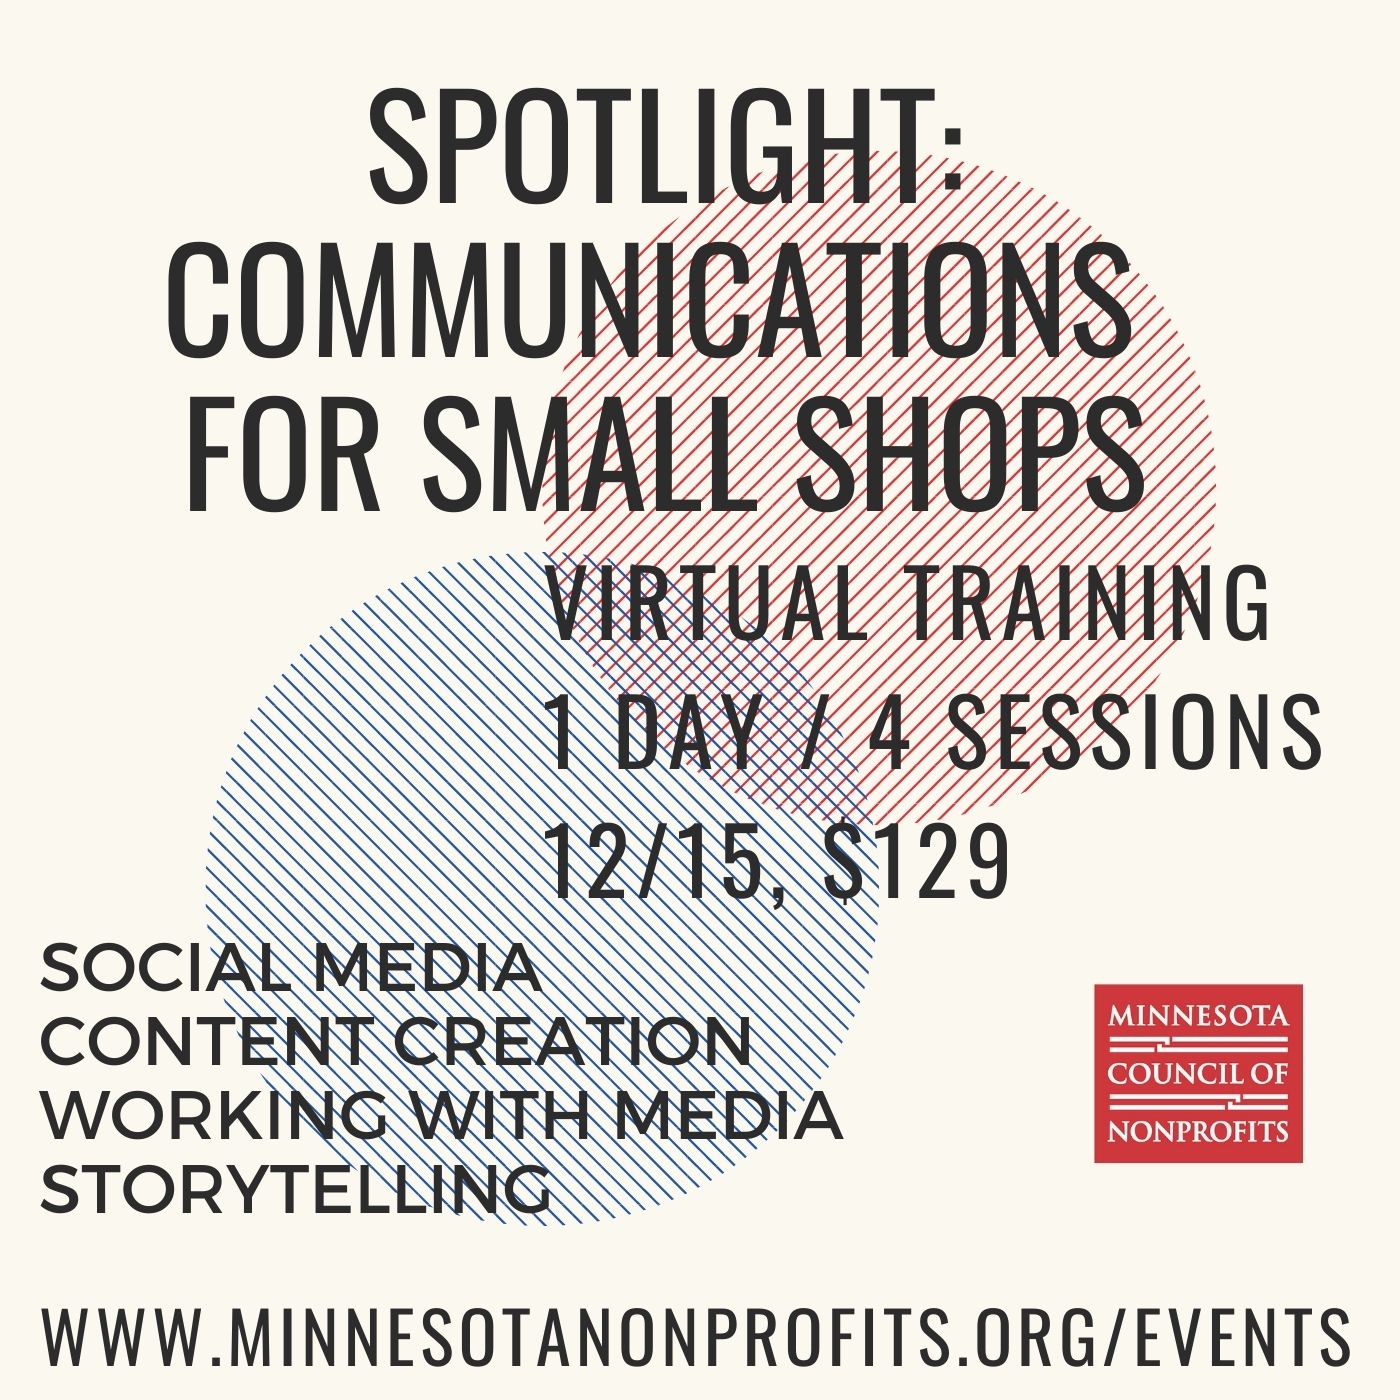 Spotlight: Communications for Small Shops virtual Training: 1 Day/ 4 sessions. 12/15 $129, social media, content creation, working with media, storytelling